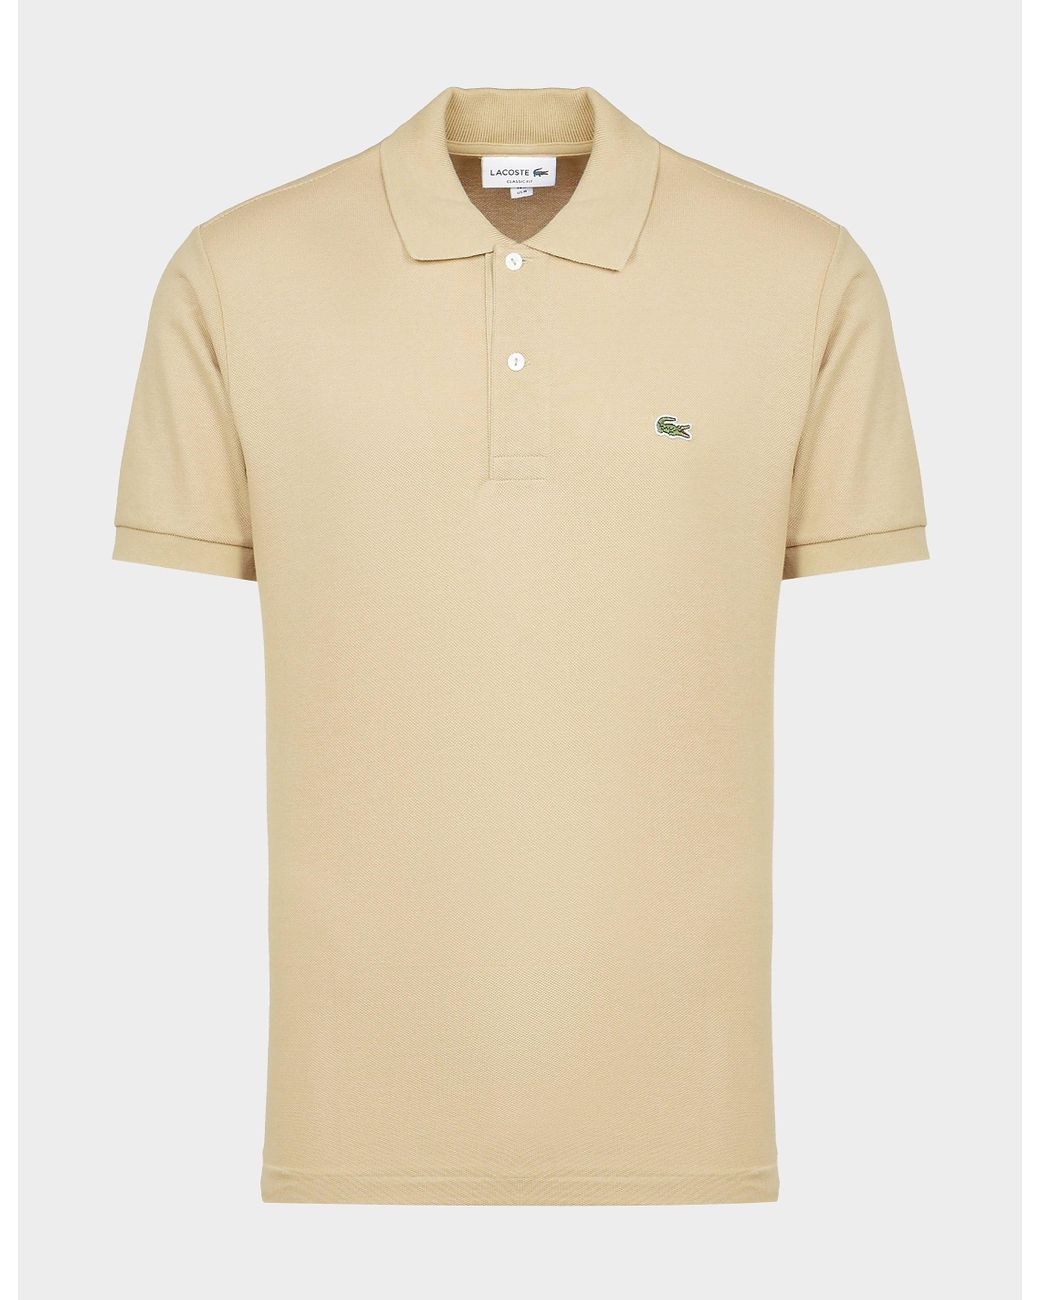 Lacoste L1212 Polo Shirt Nude in Beige/Beige (Natural) for Men - Lyst